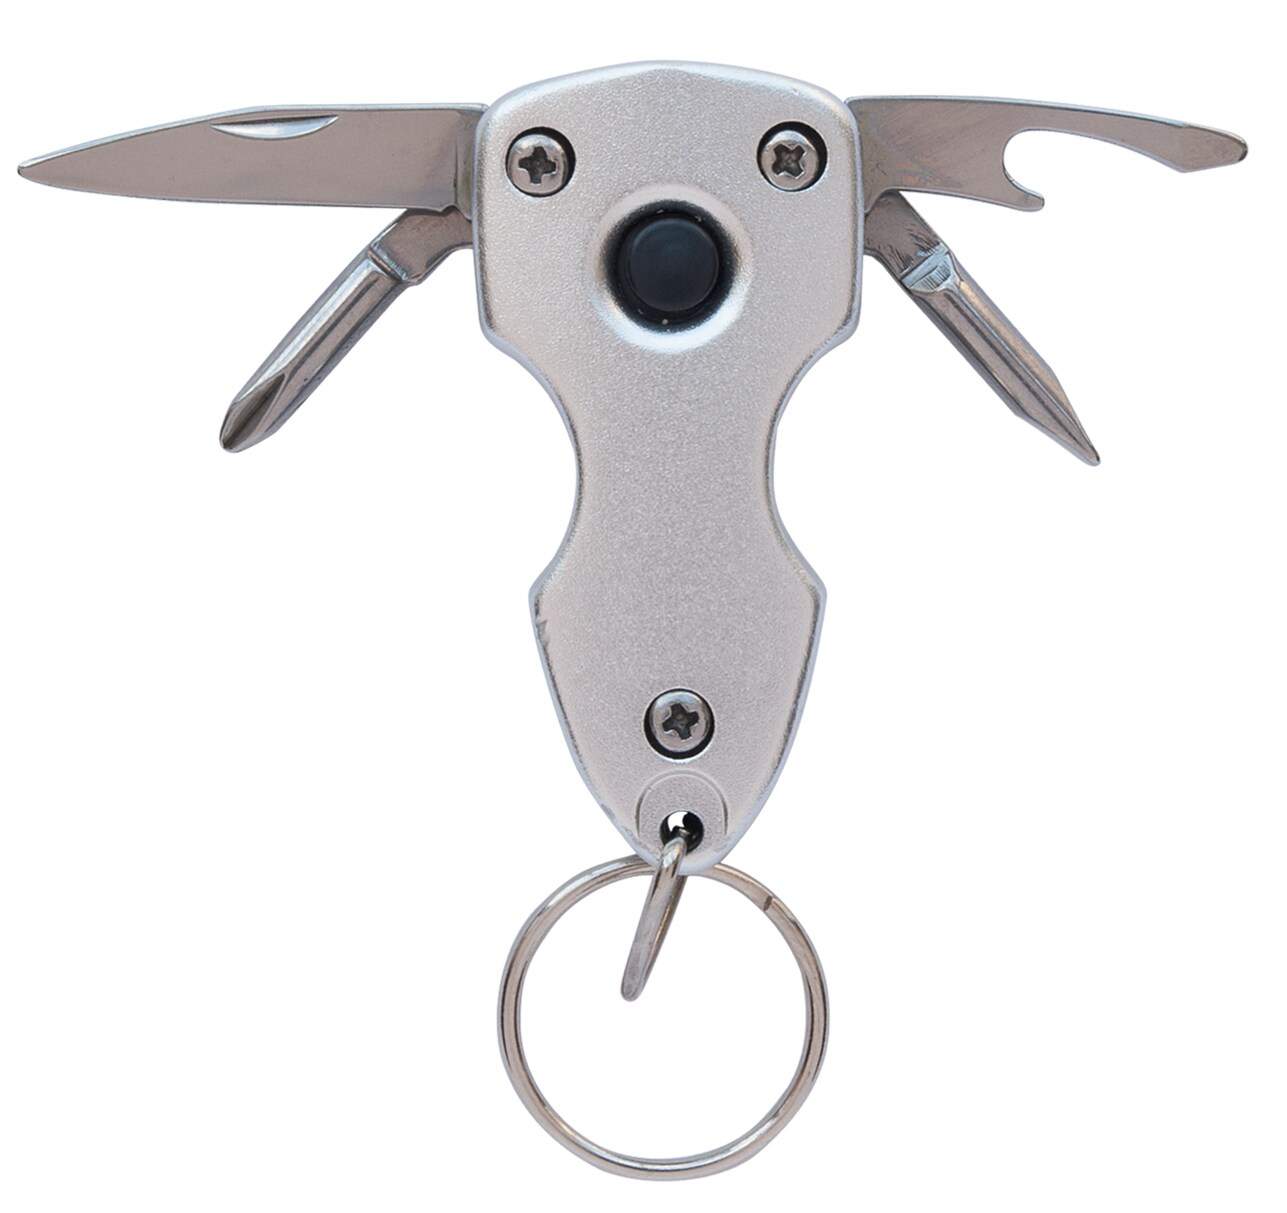  BUBBA Nipper & Tether Combo with Stainless Steel Blades and  Rubberized Grip and 42 Line Attachment for Any Angler : Tools & Home  Improvement